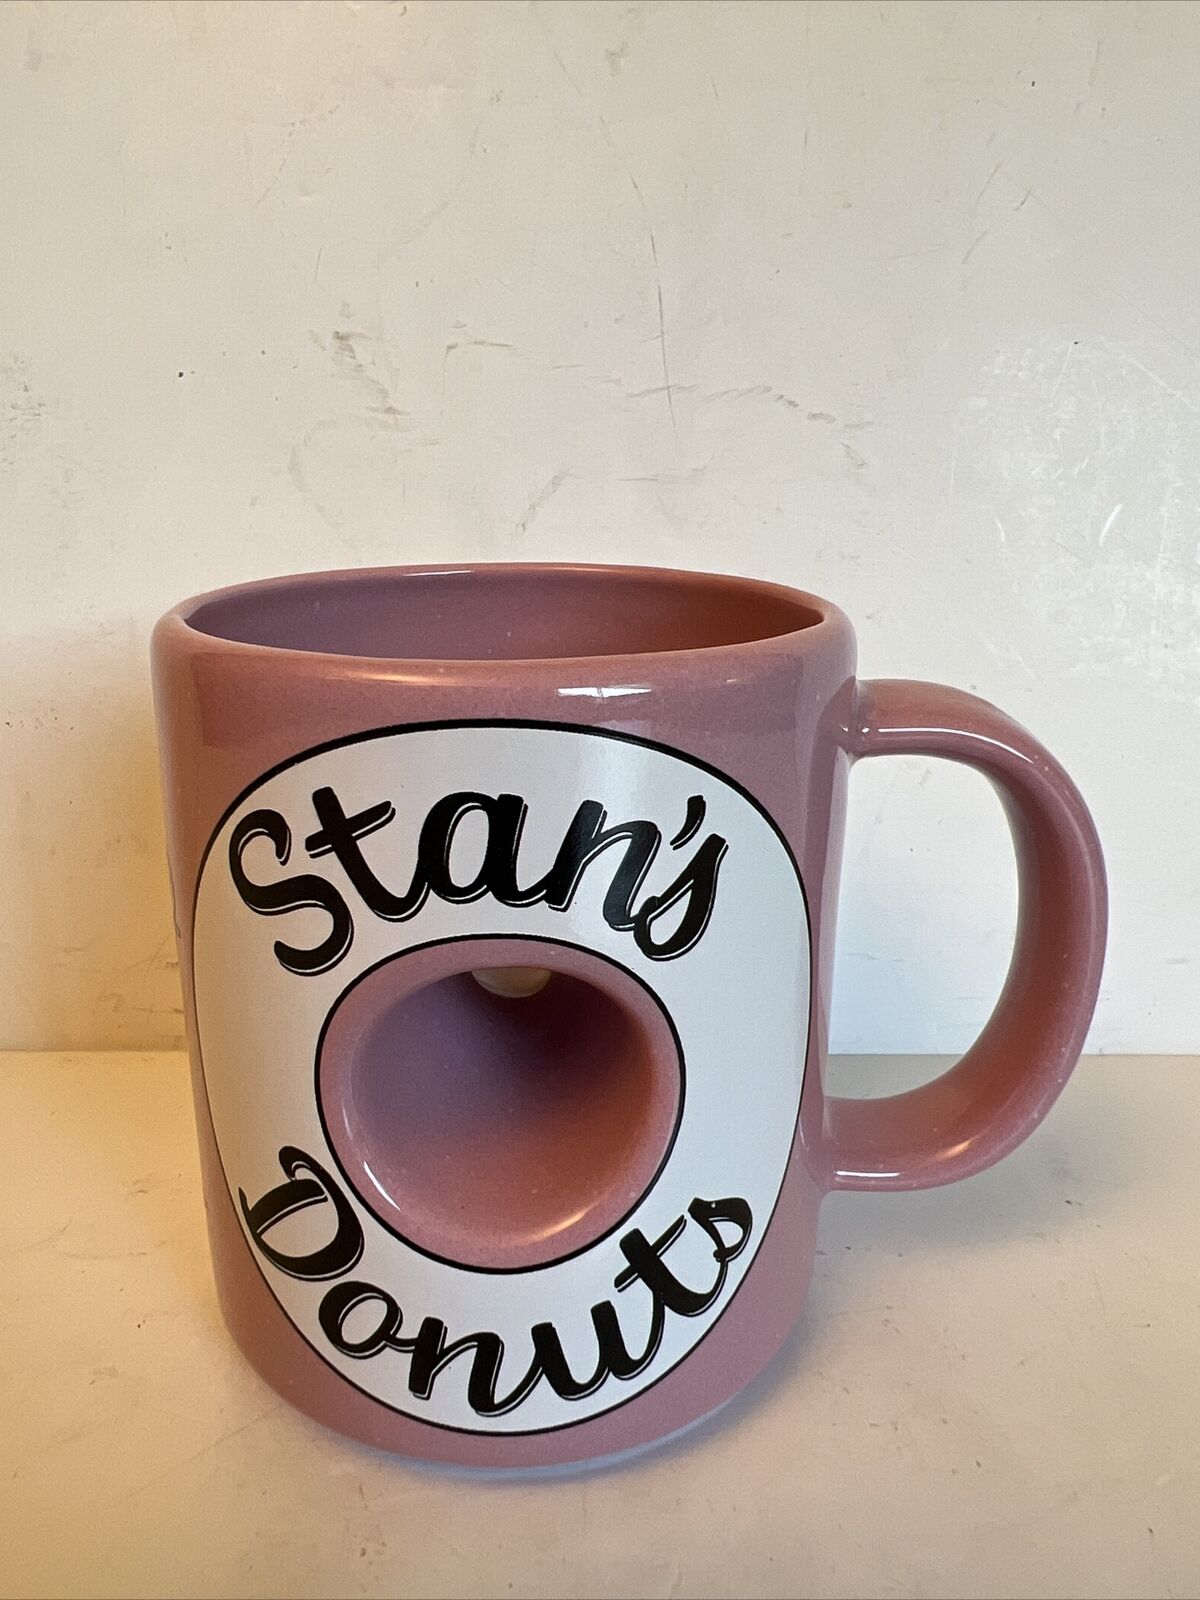 Stan’s Donuts Coffee Mug Doughnut Hole Cup Ceramic Vintage 4” Tall Made In USA